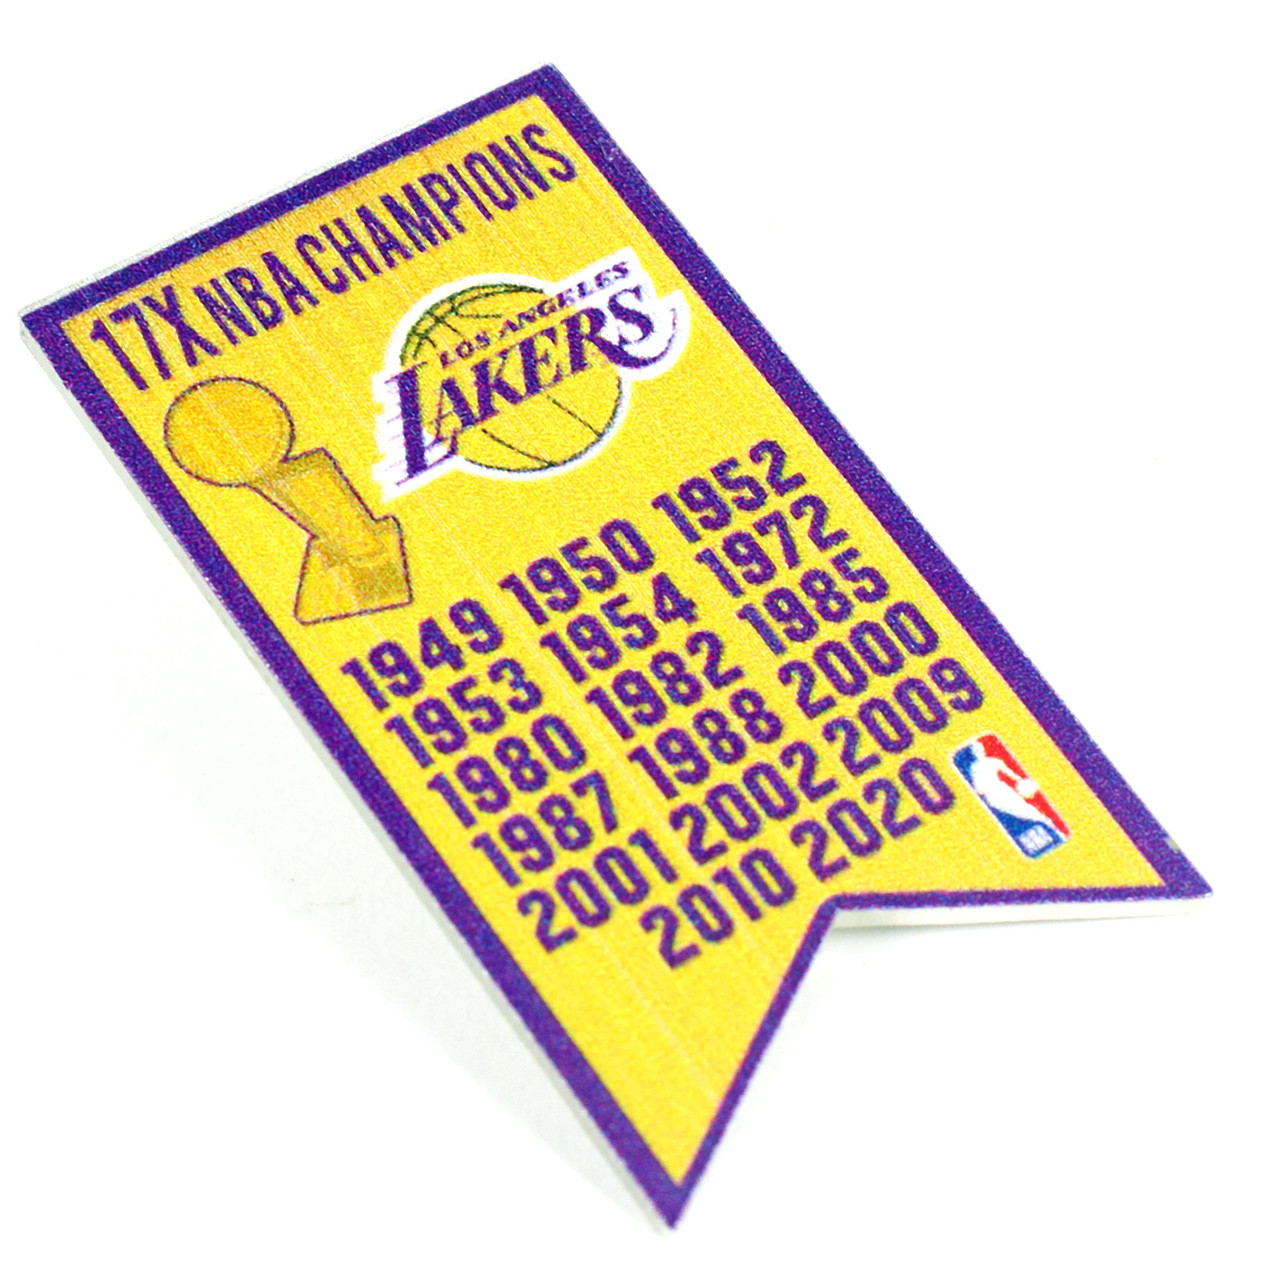 Lakers Championship 2020 17 Time NBA Finals Champions A-Line